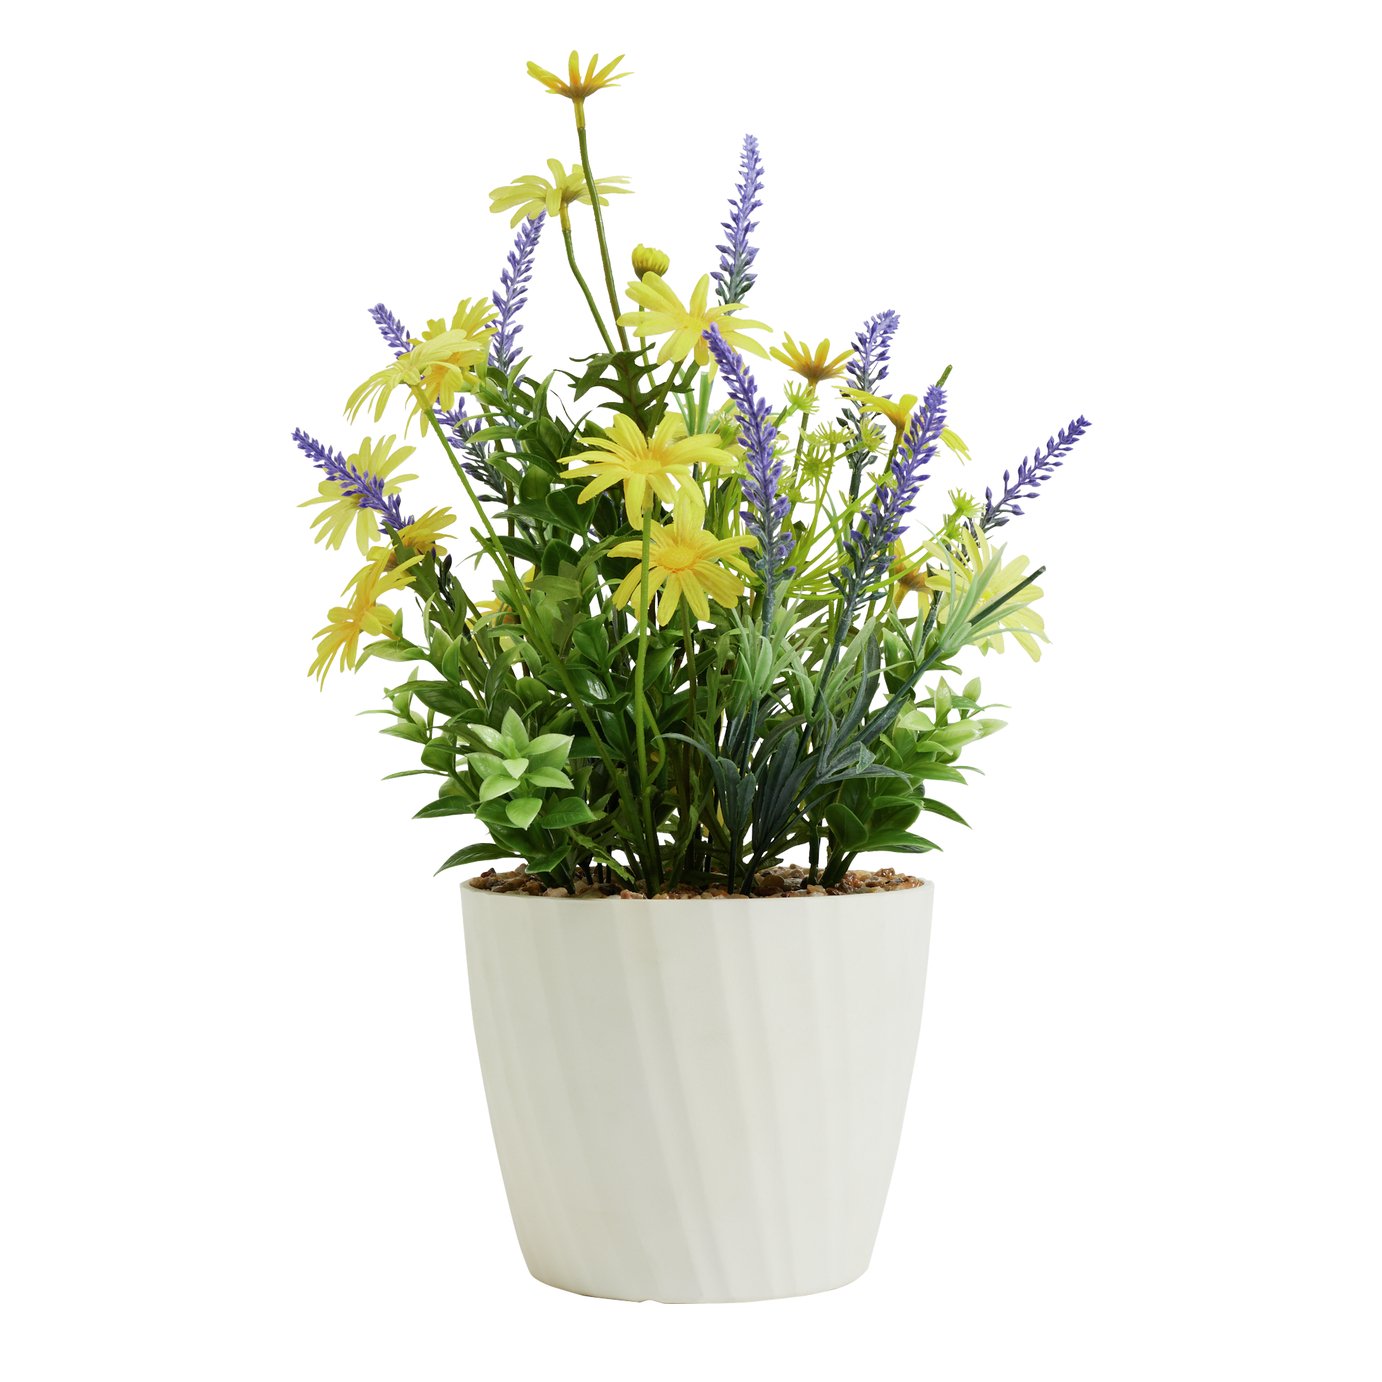 Garden By Sainsbury's Artificial Yellow Flowers In Pot 